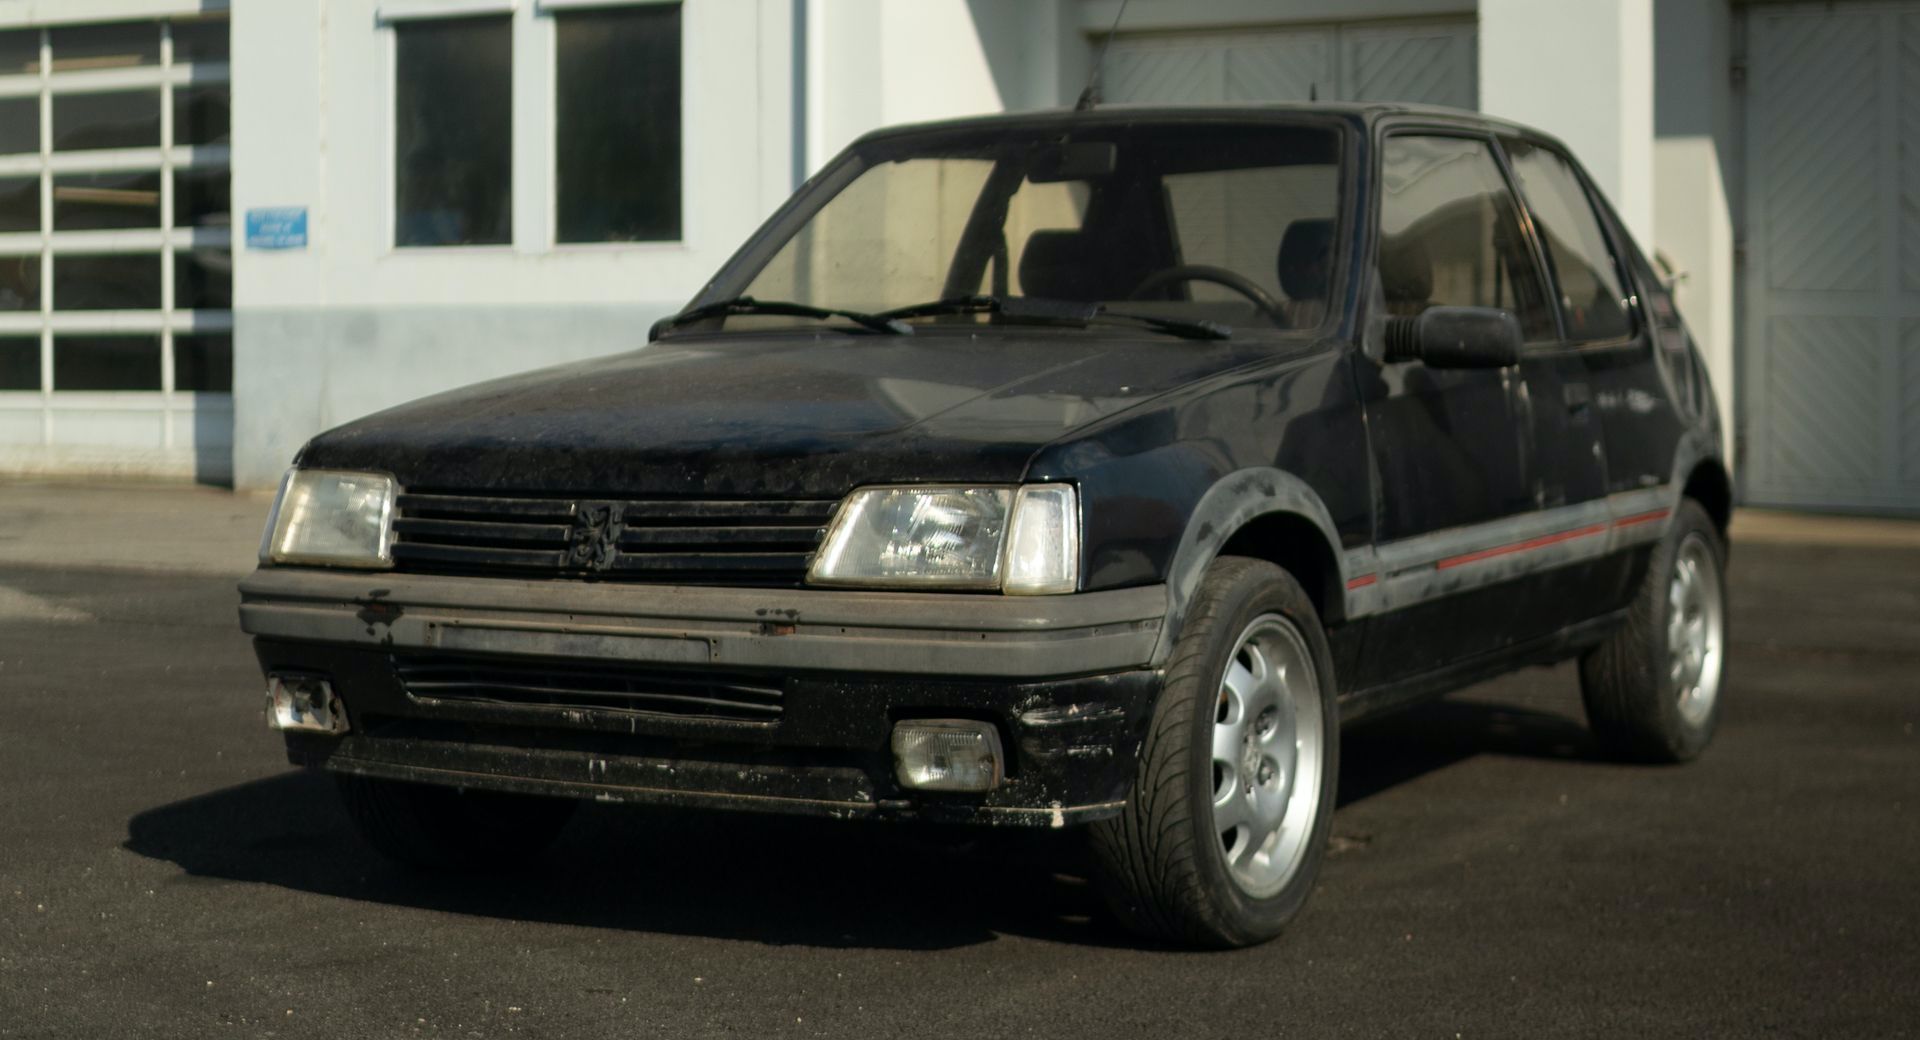 jurk Schrijft een rapport Productiecentrum Peugeot Will Restore And Sell This 205 GTi 1.9, Petrolheads Rejoice |  Carscoops